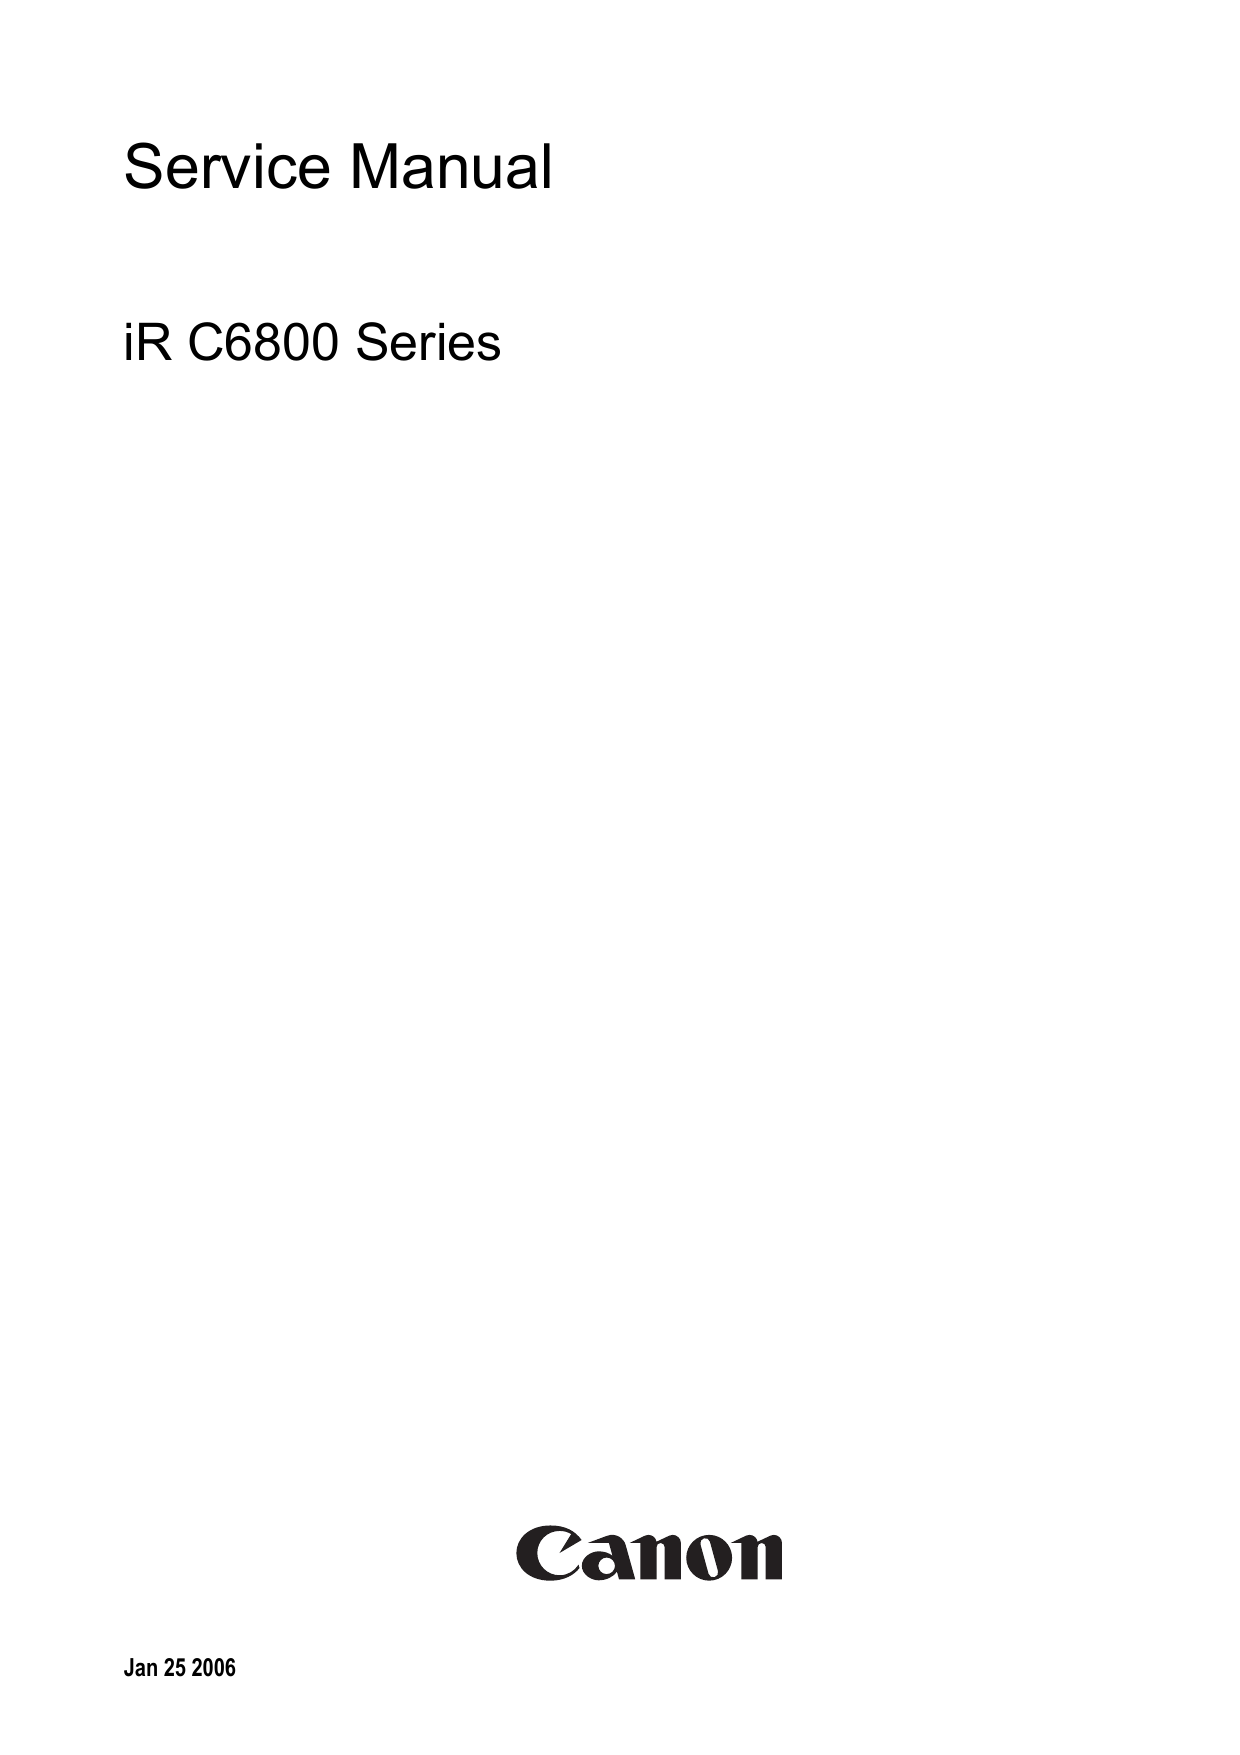 Canon imageRUNNER IR C6800 series copier service manual Preview image 6